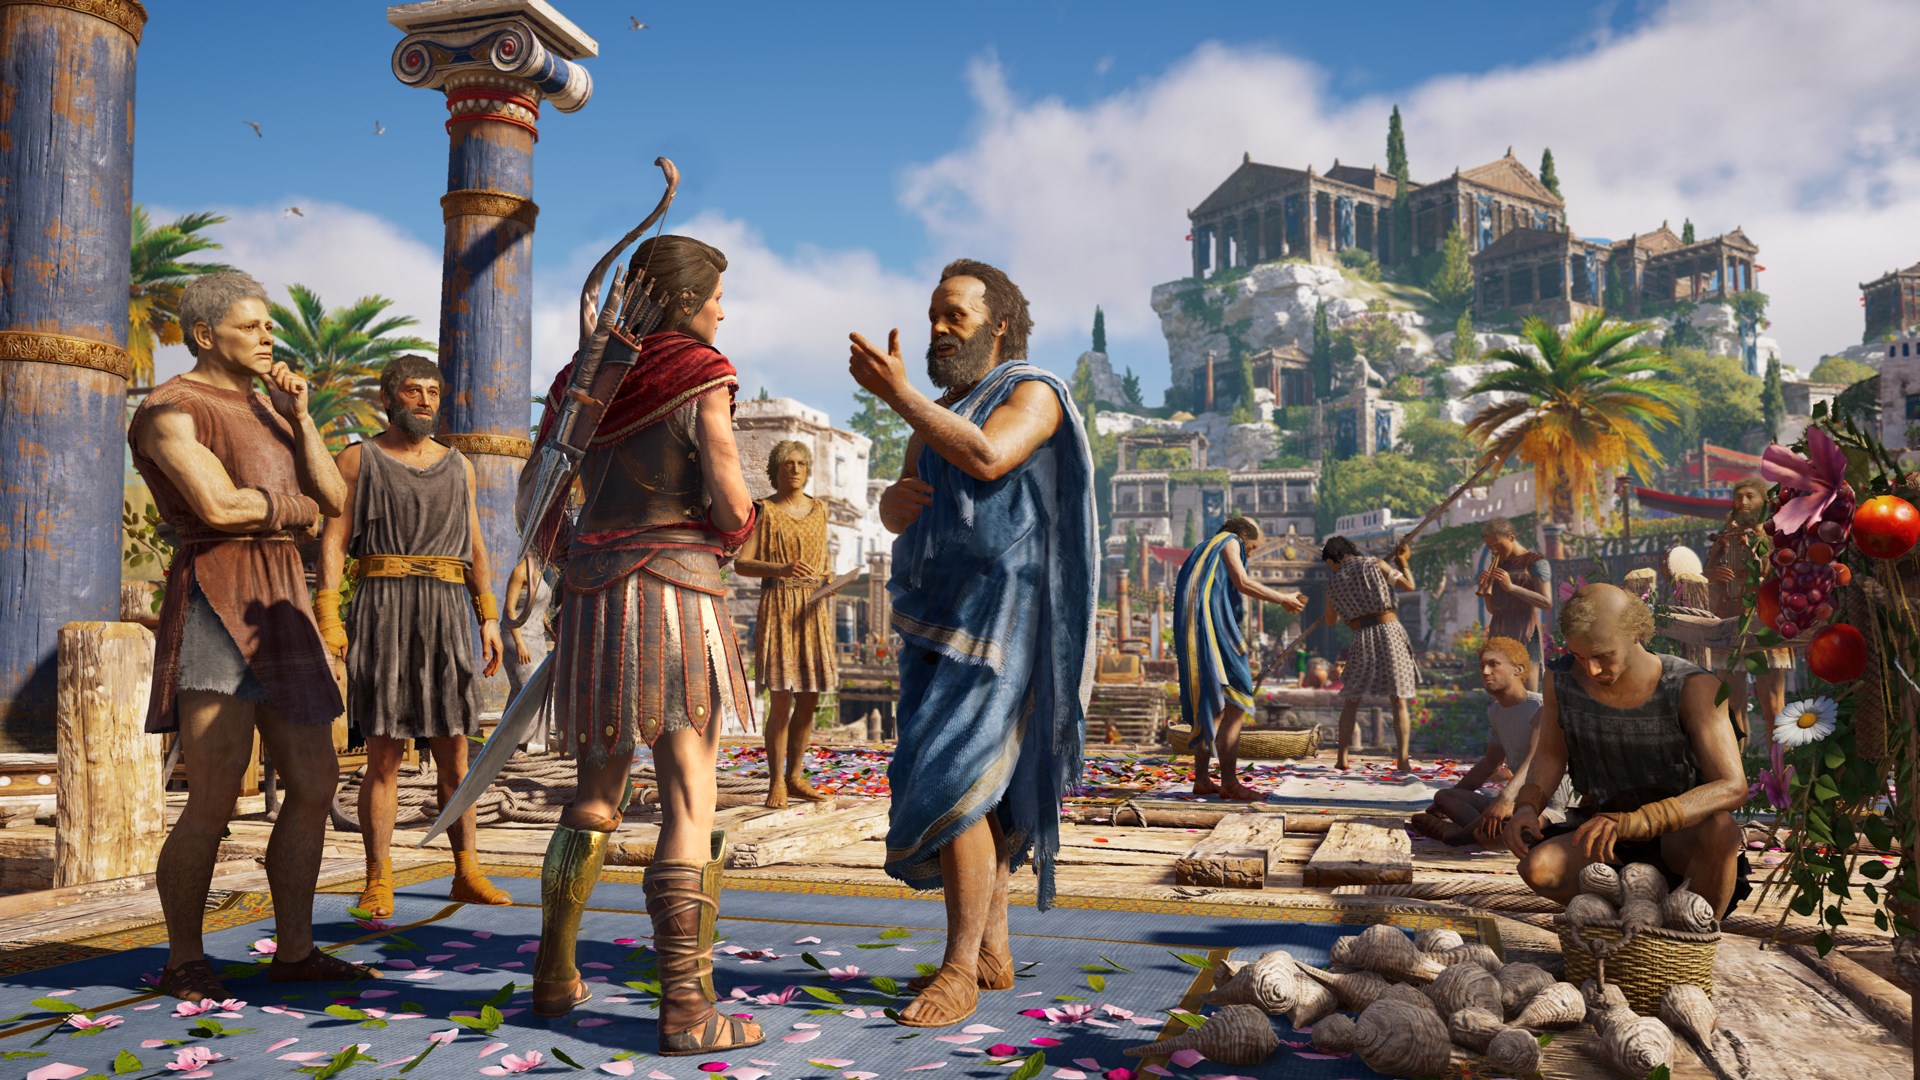 Assassin´s Creed Odyssey - Ultimate Edition (Steam Gift RU)